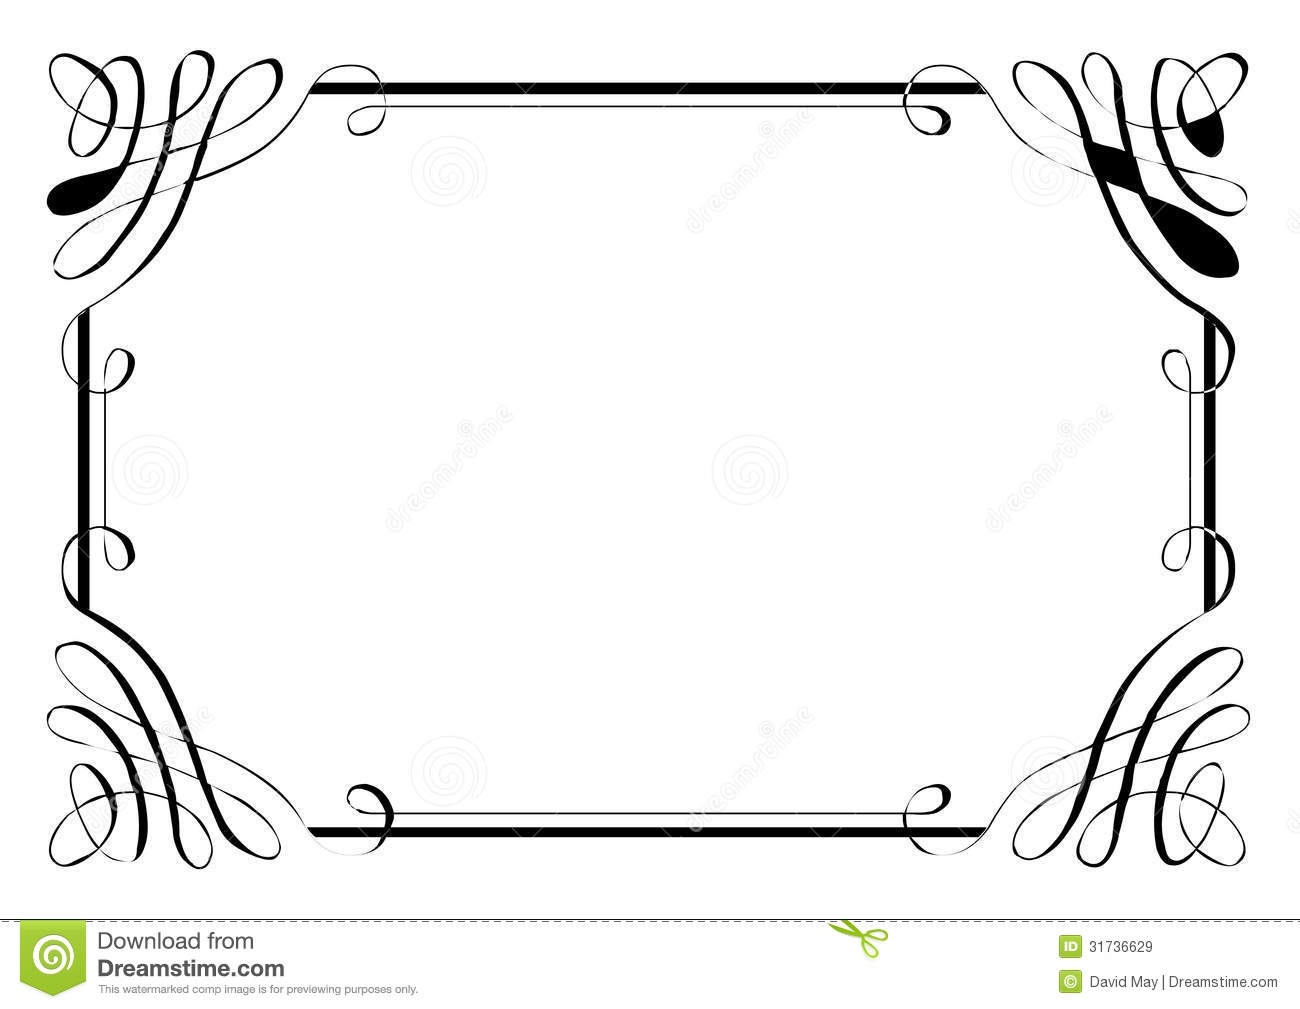 Fancy Page Border Four Royalty Free Stock Images   Image  31736629